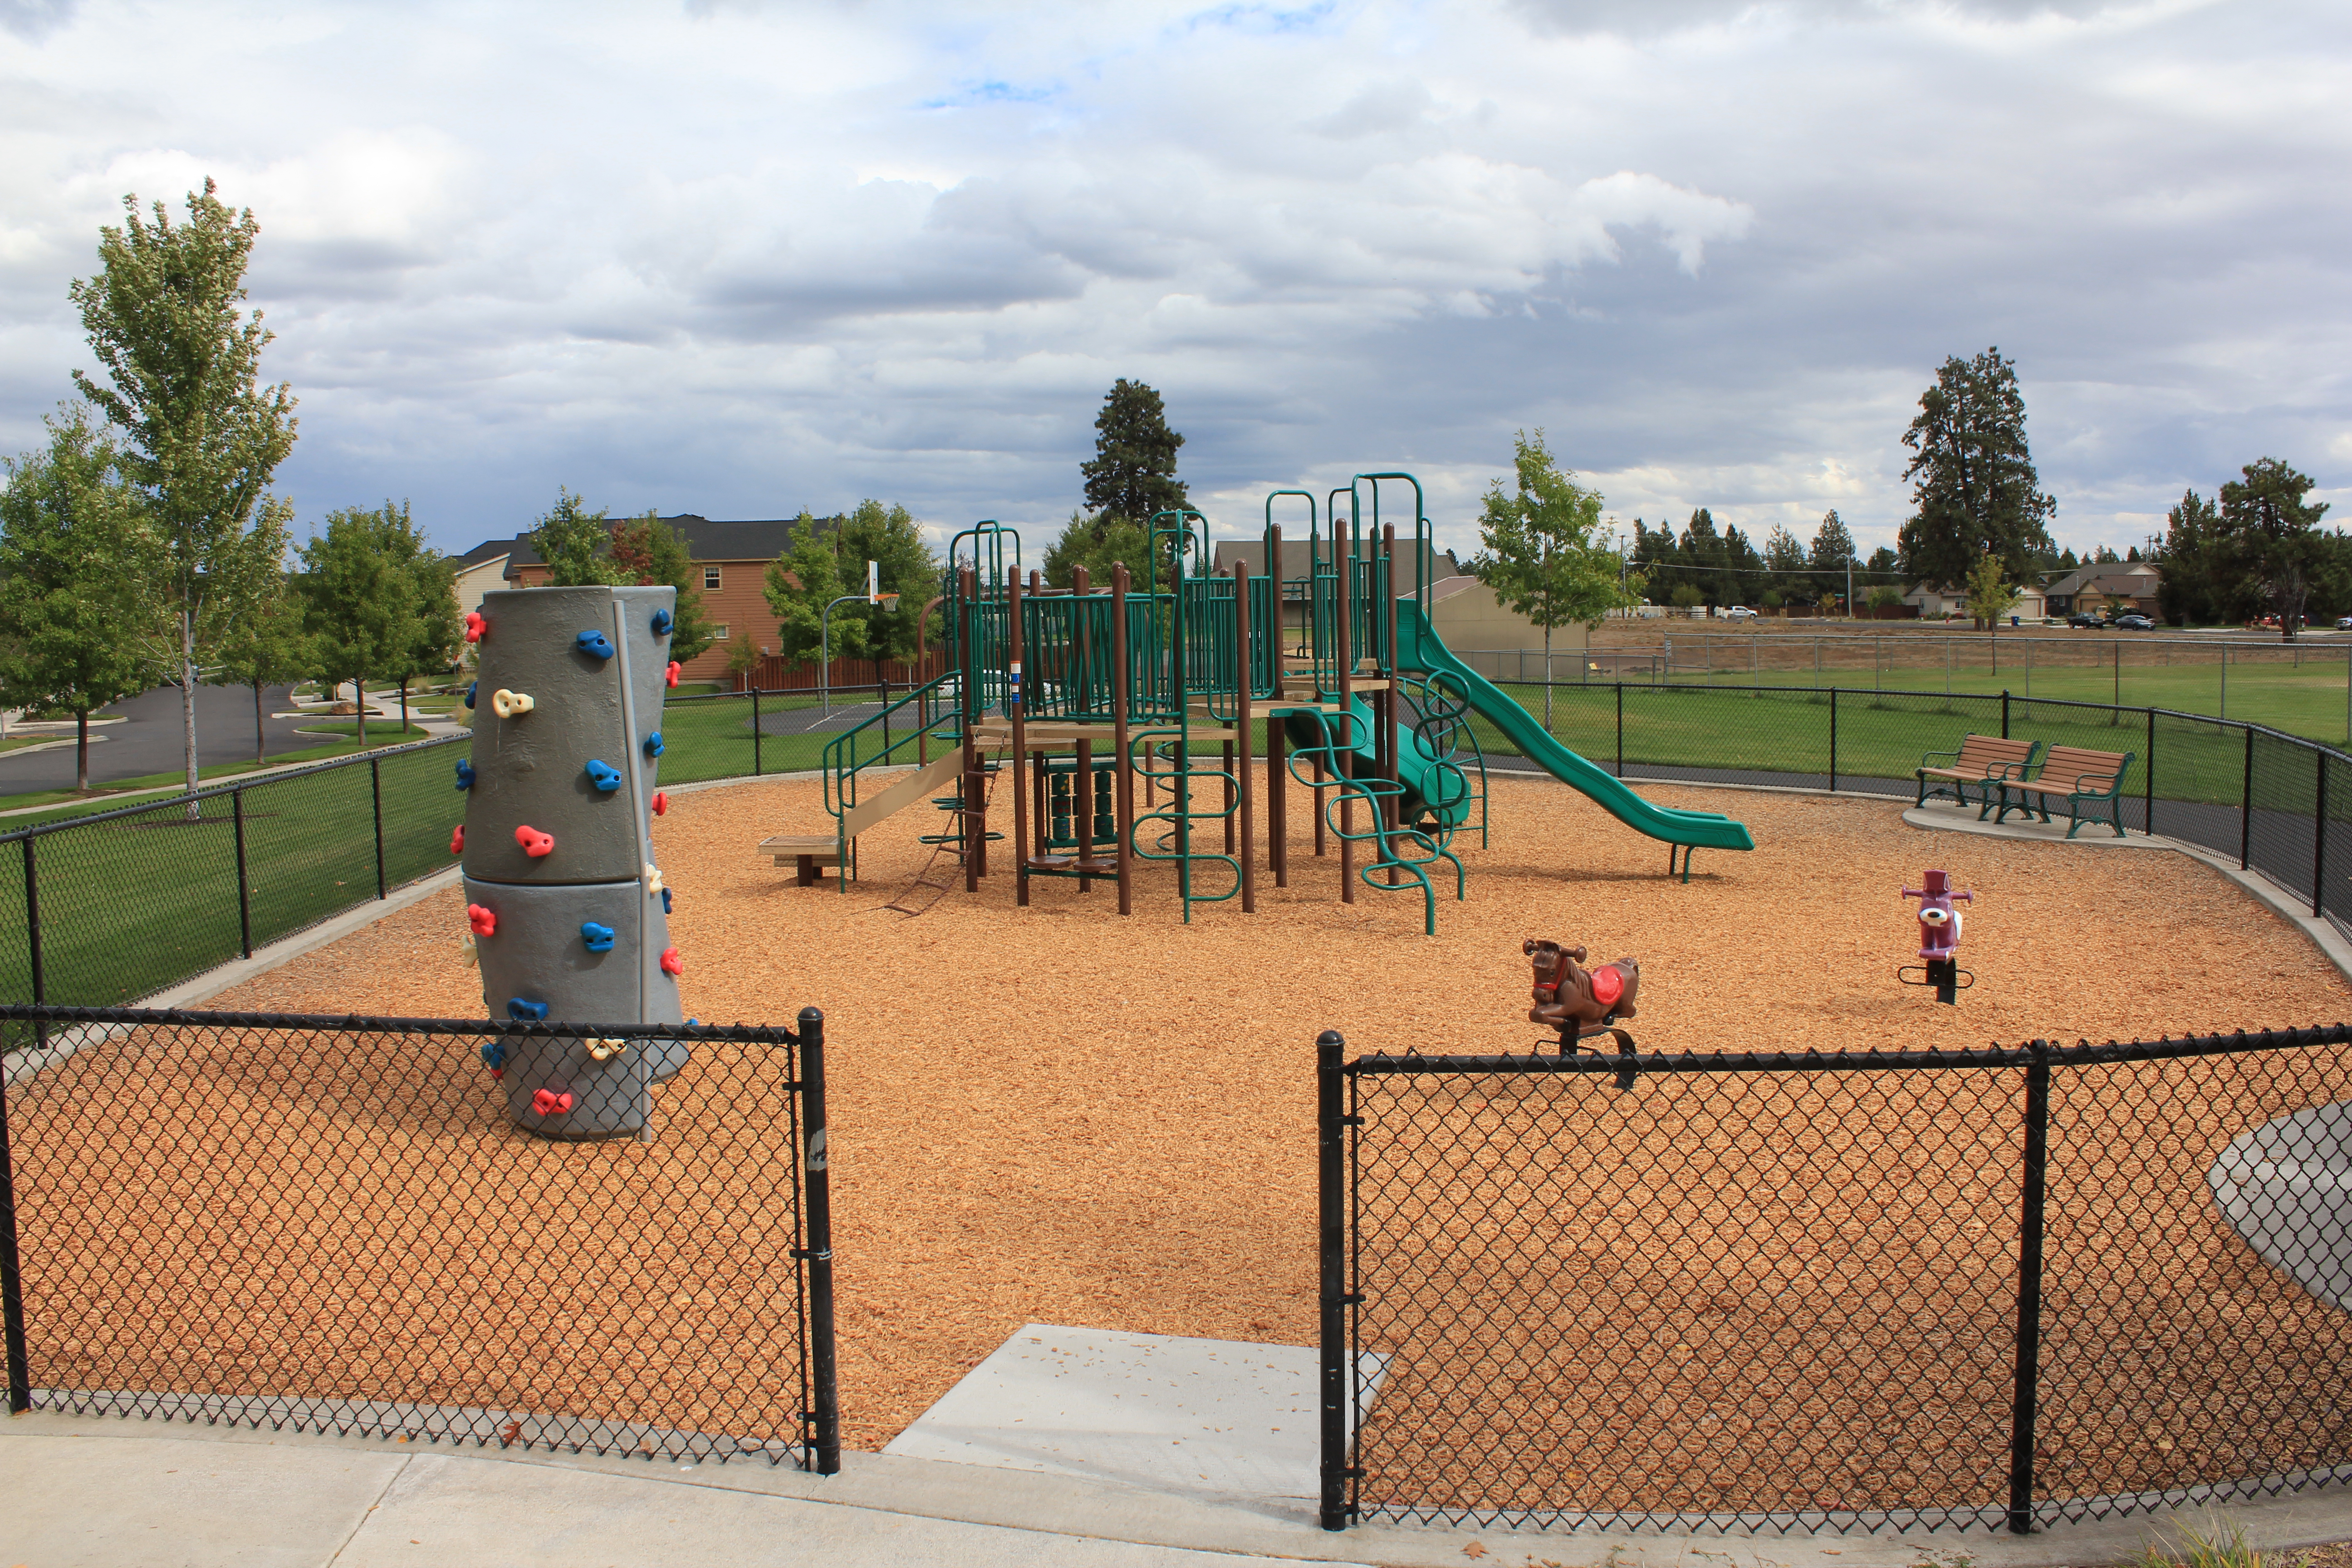 The playground at Sun Meadow Park